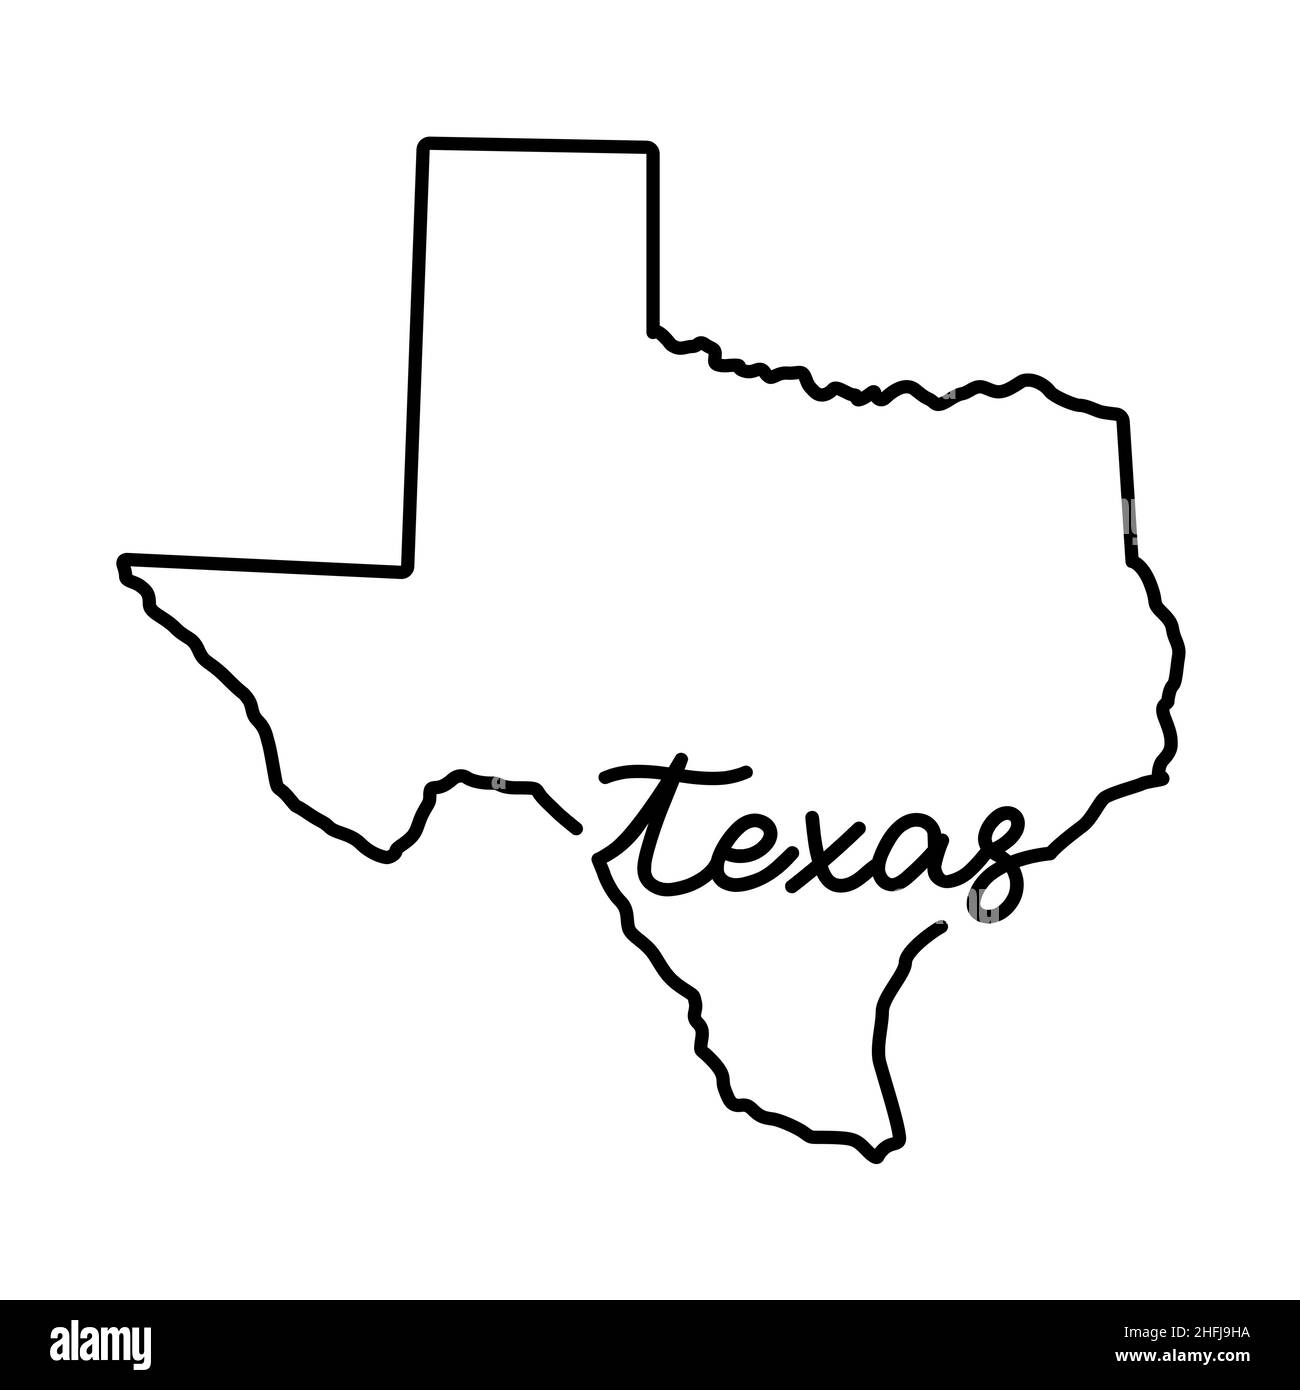 Texas US state outline map with the handwritten state name